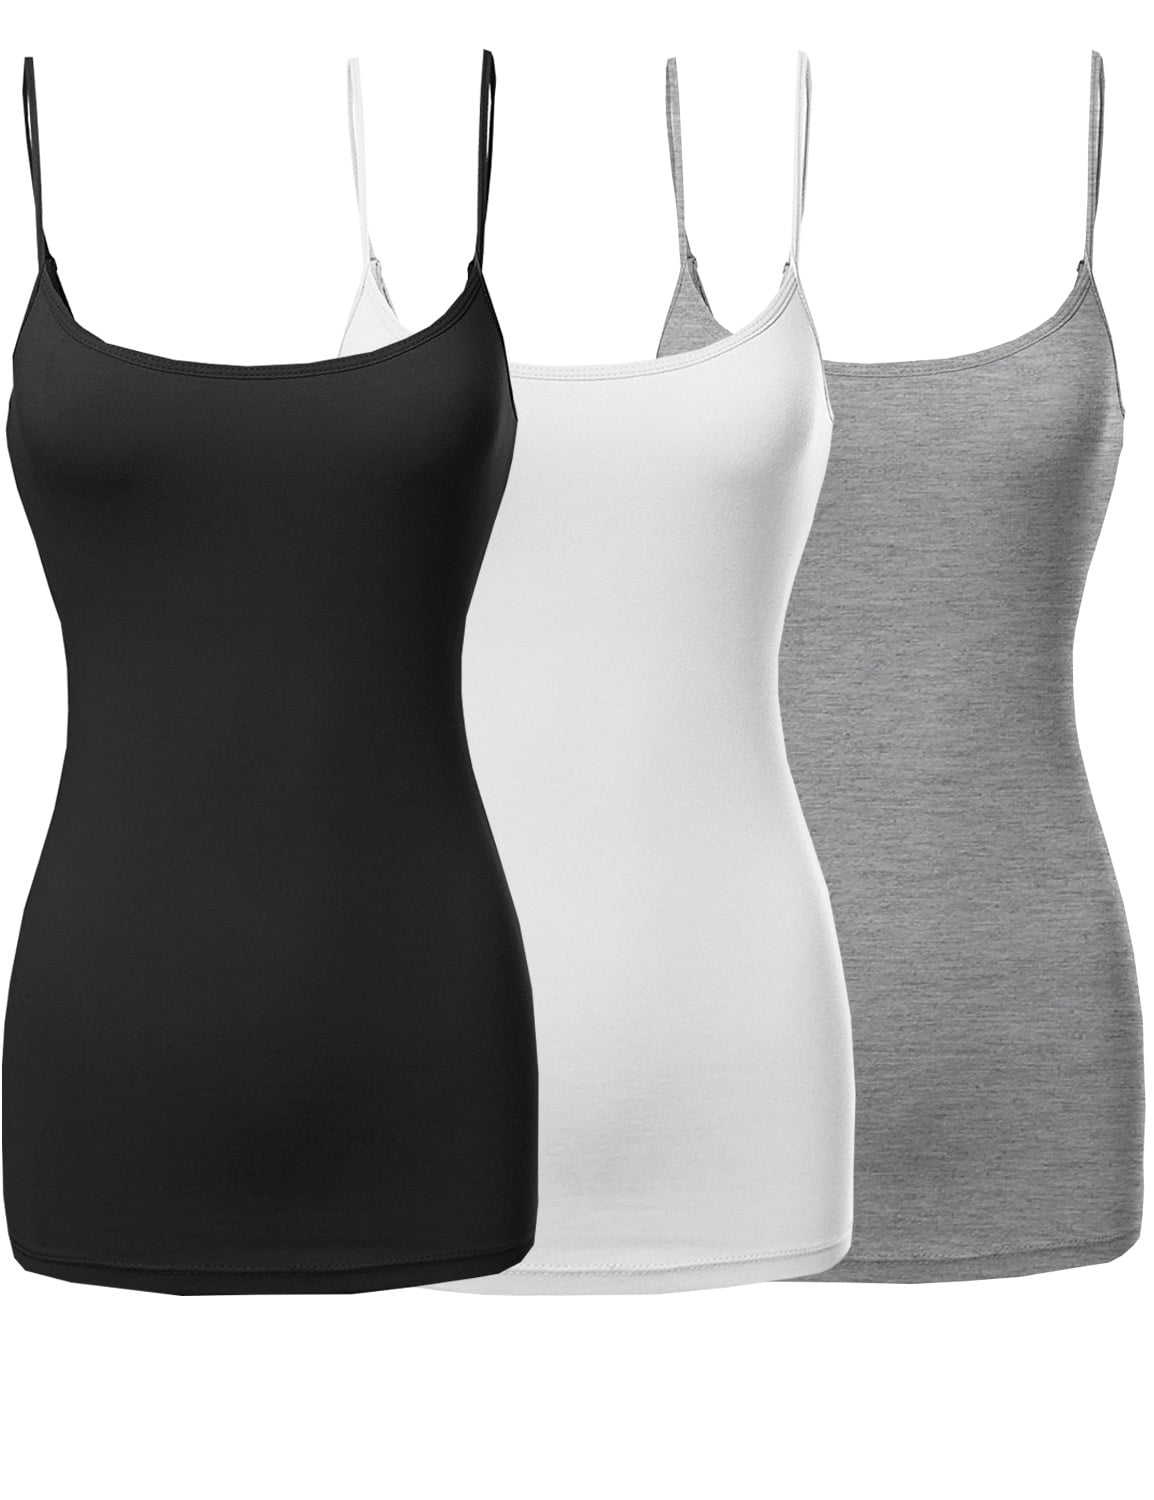 Maidenform Women's Cover Your Bases SmoothTec Shapewear Camisole